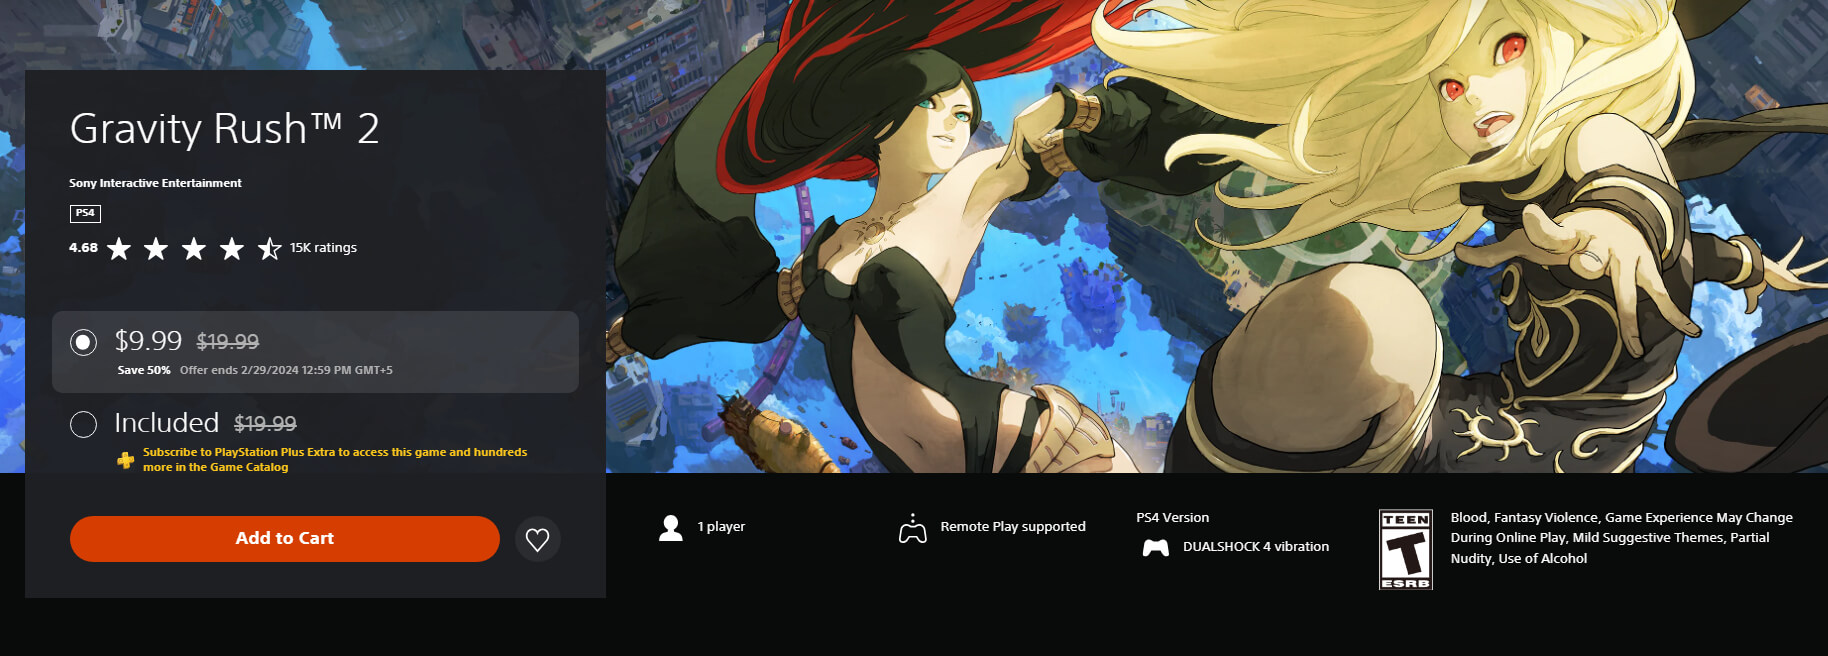 Gravity Rush 2 on the PlayStation Store